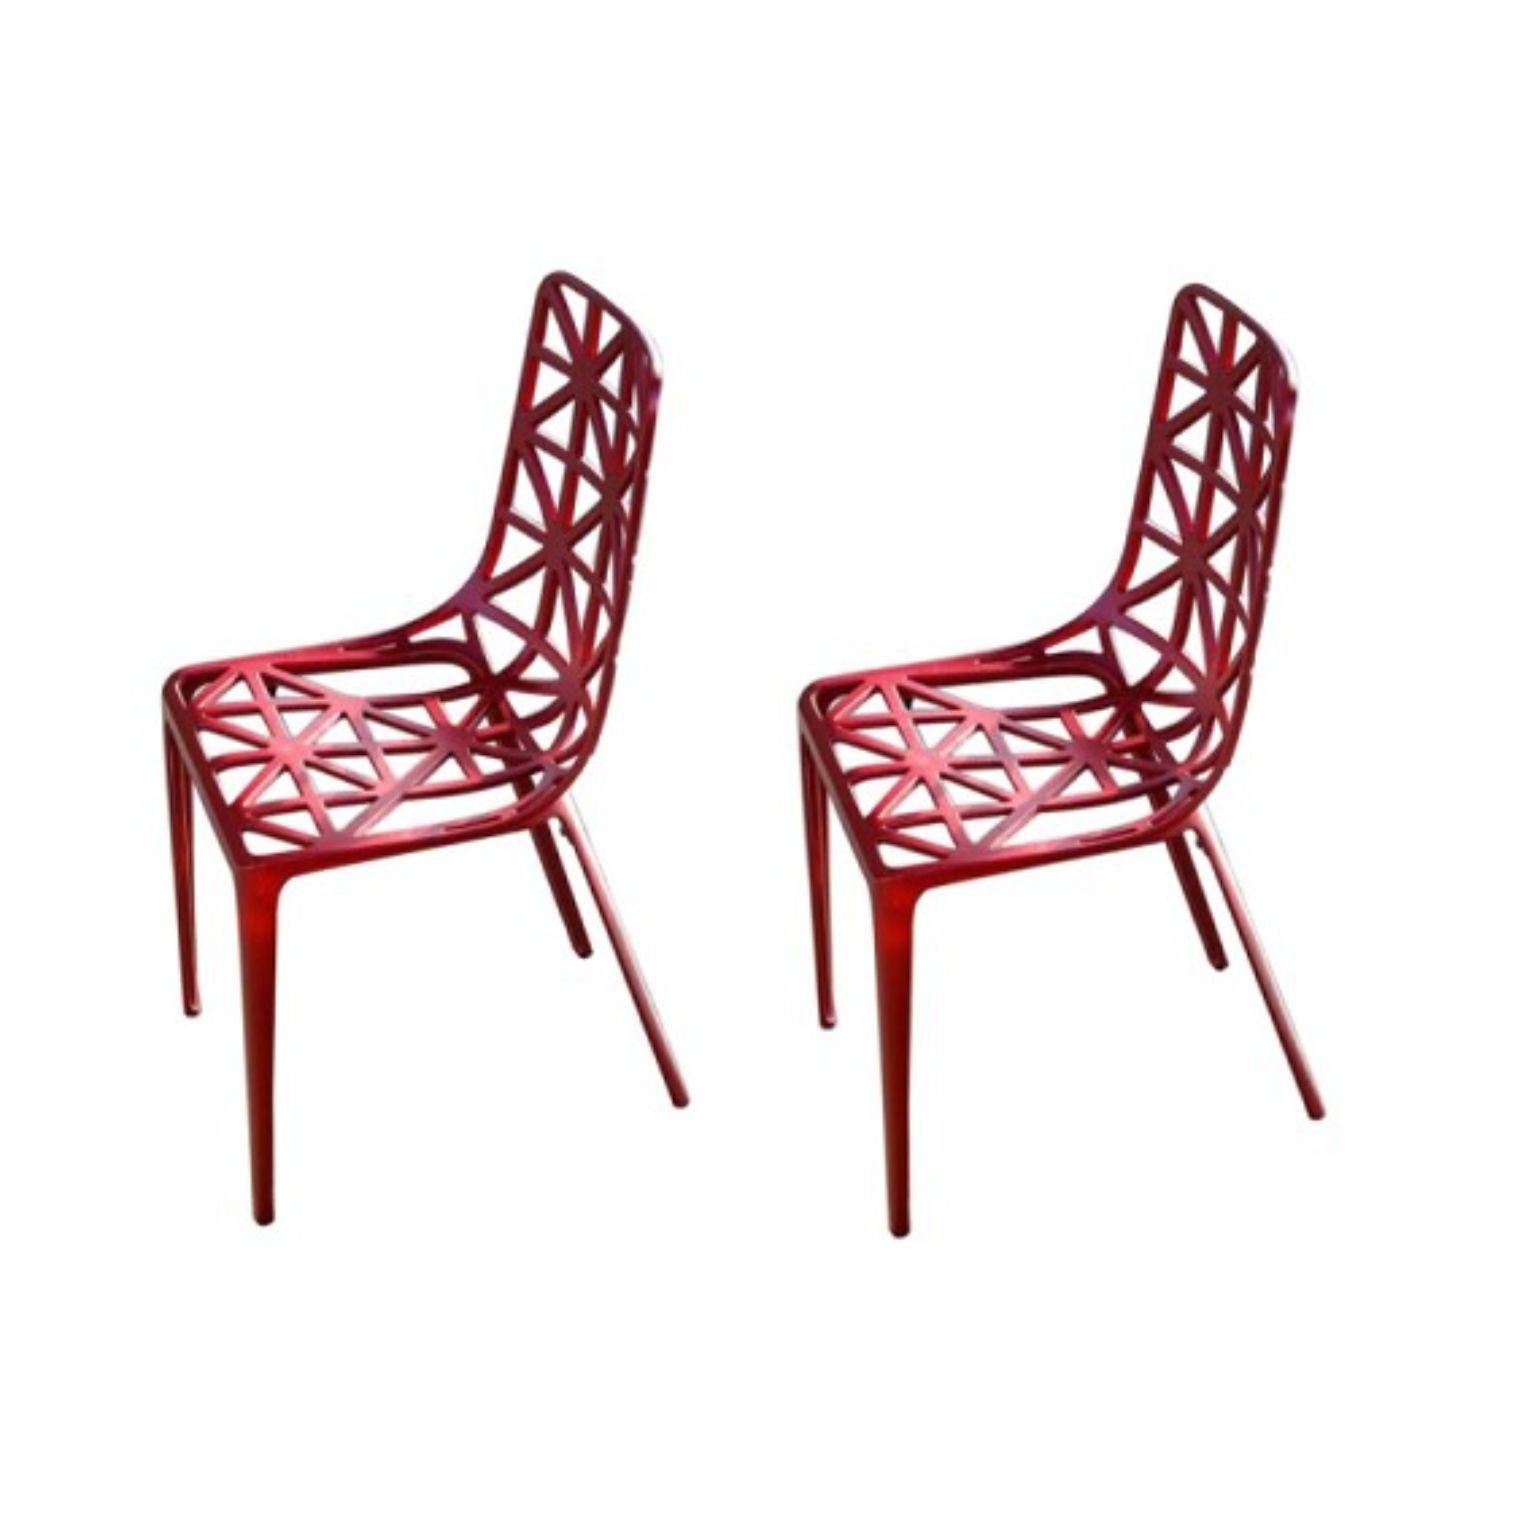 Set of 2 red new Eiffel Tower chairs by Alain Moatti
Materials: structure in epoxy lacquered cast aluminum (suitable for outdoor and indoor)
Dimensions: D 41 x W 44 x H 88 cm
Available colors: Eiffel Tower, black, white, or aluminum, and red